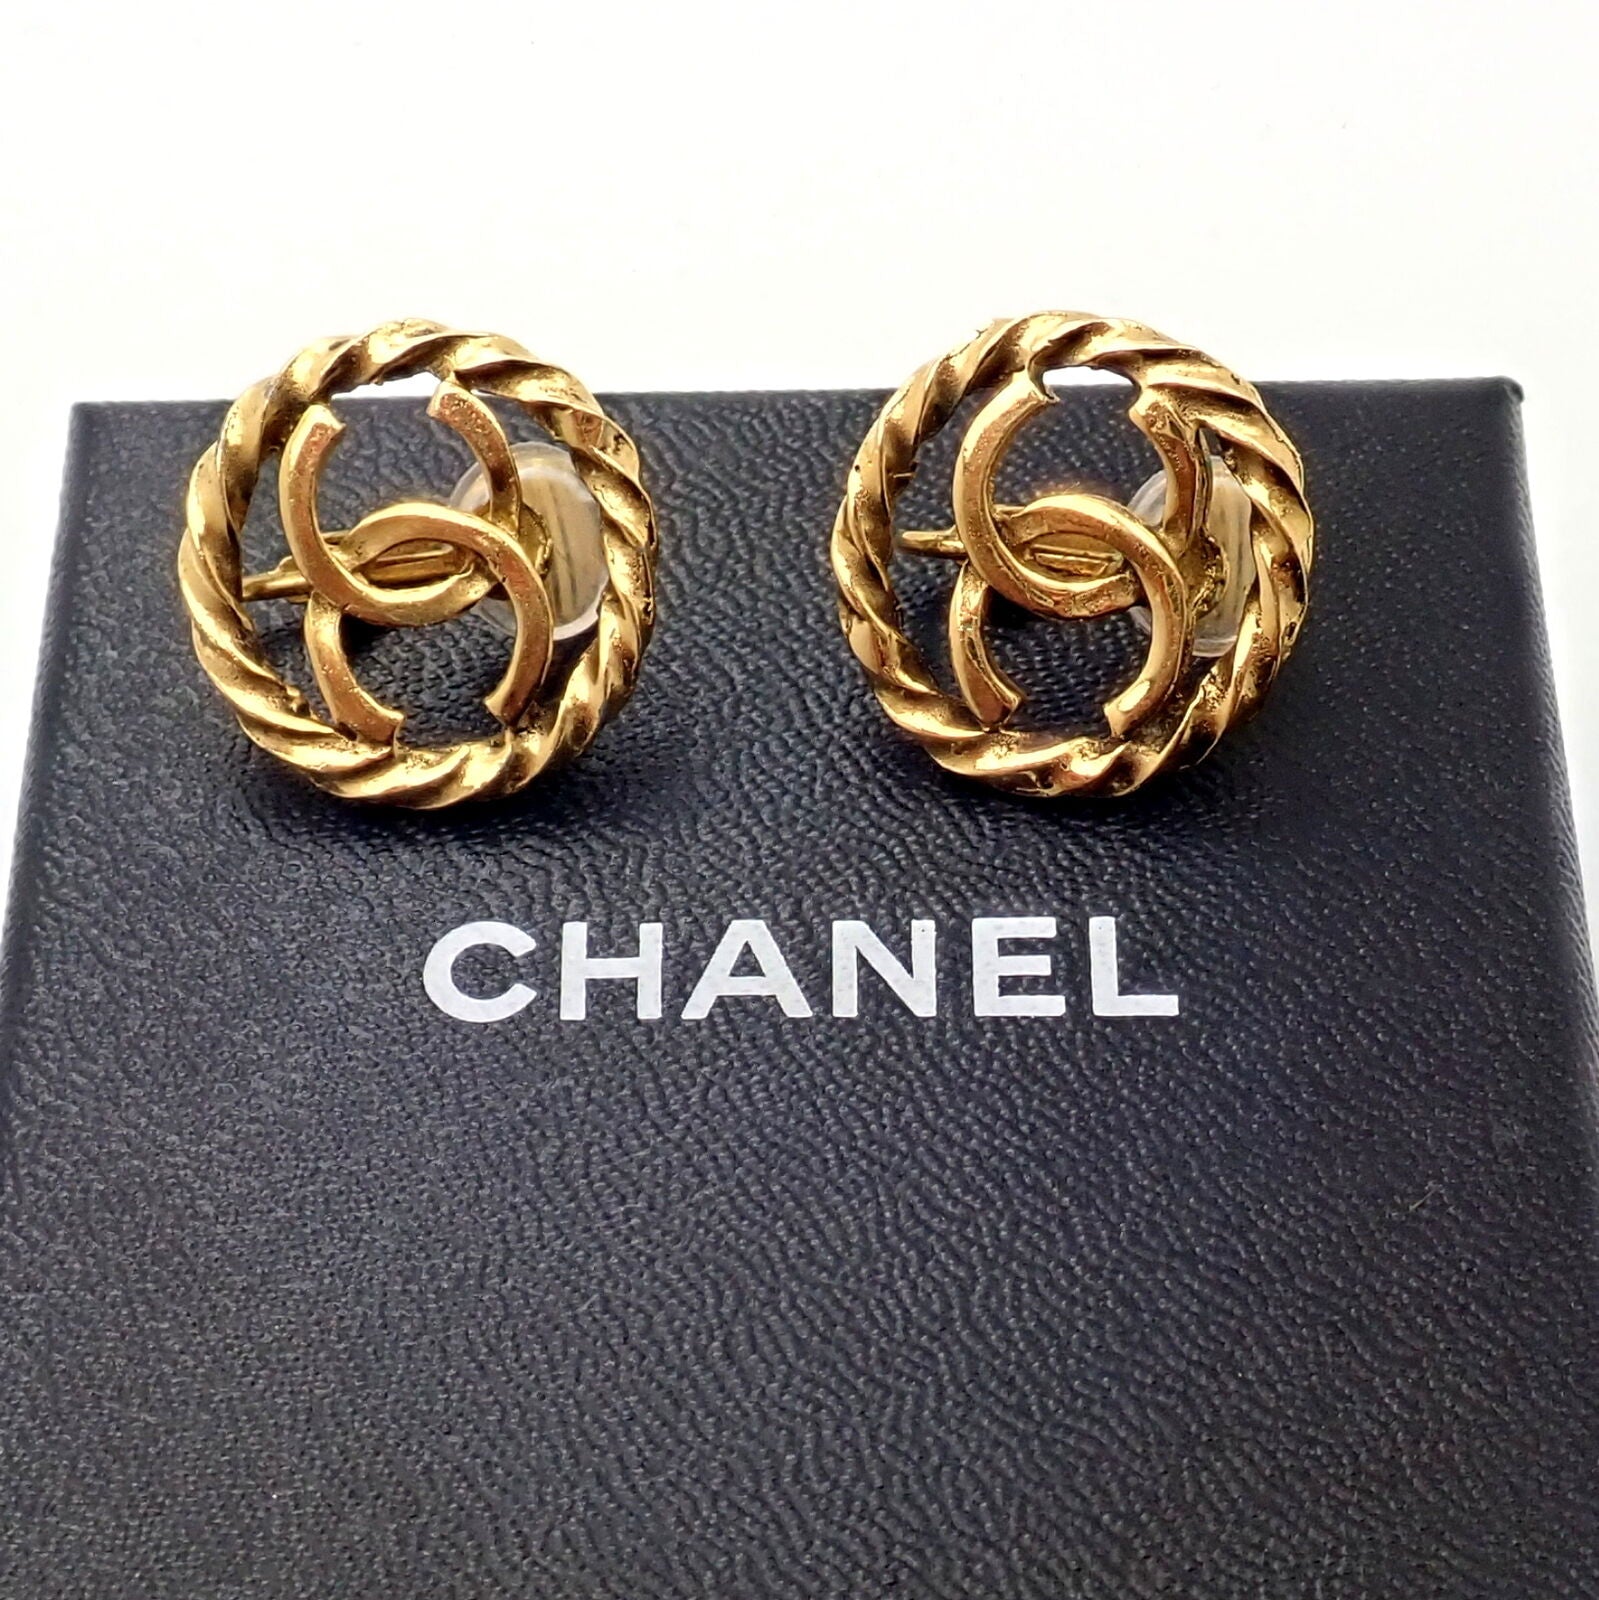 Chanel Jewelry & Watches:Vintage & Antique Jewelry:Earrings Rare! Vintage Chanel Paris France Classic CC Logo Earrings 1970's 2158